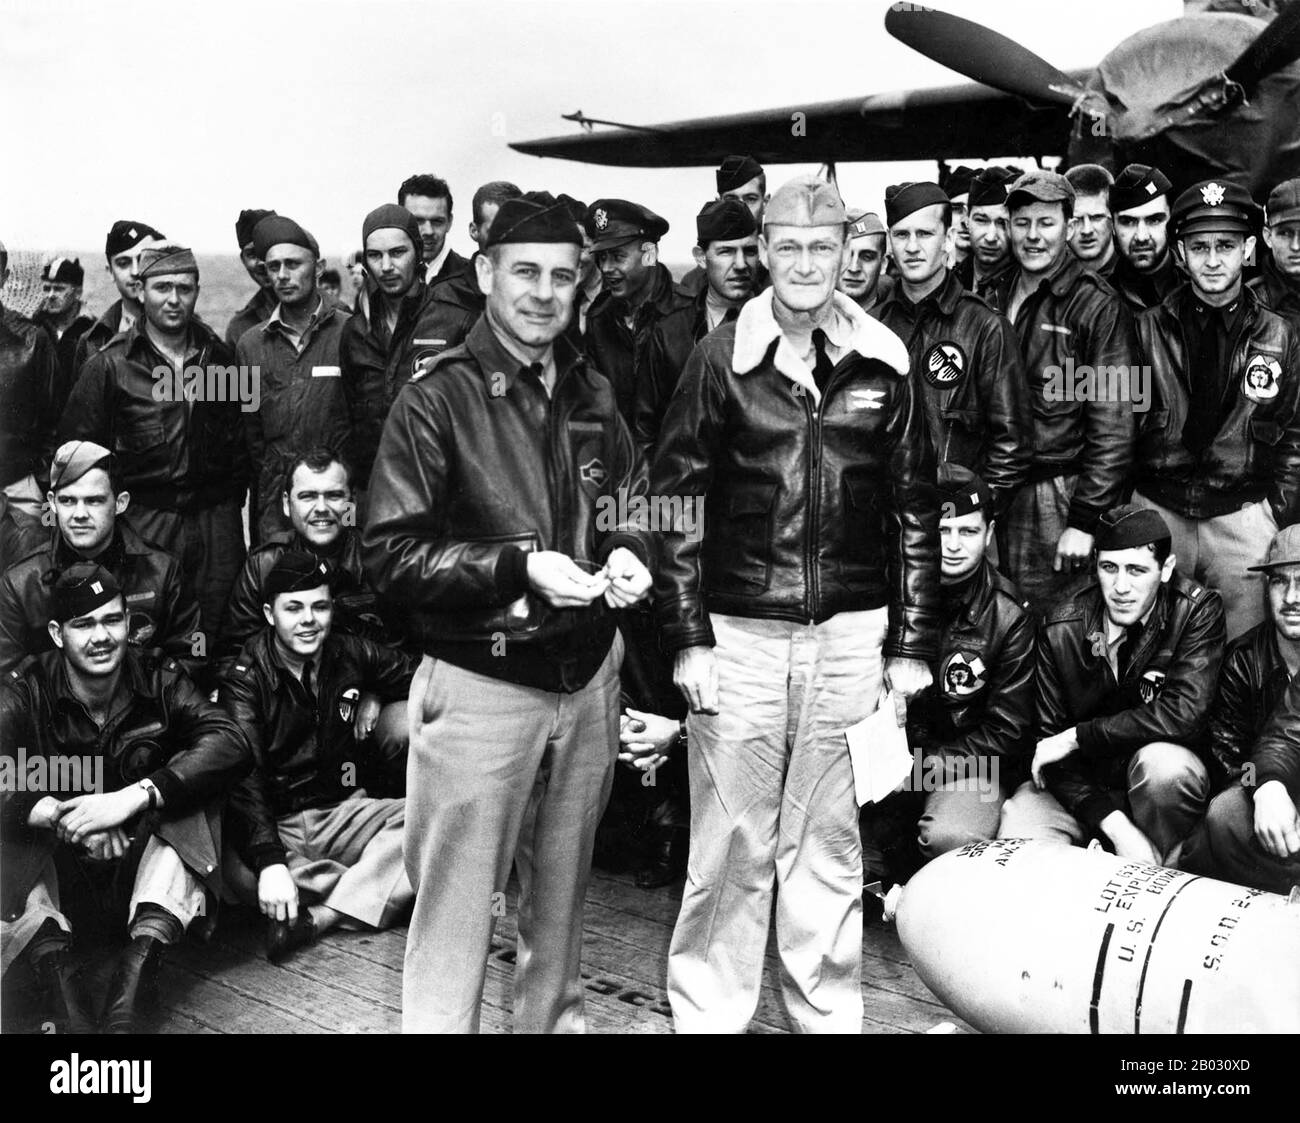 The Doolittle Raid Also Known As The Tokyo Raid On 18 April 1942 Was An Air Raid By The United States On The Japanese Capital Tokyo And Other Places On Honshu Island